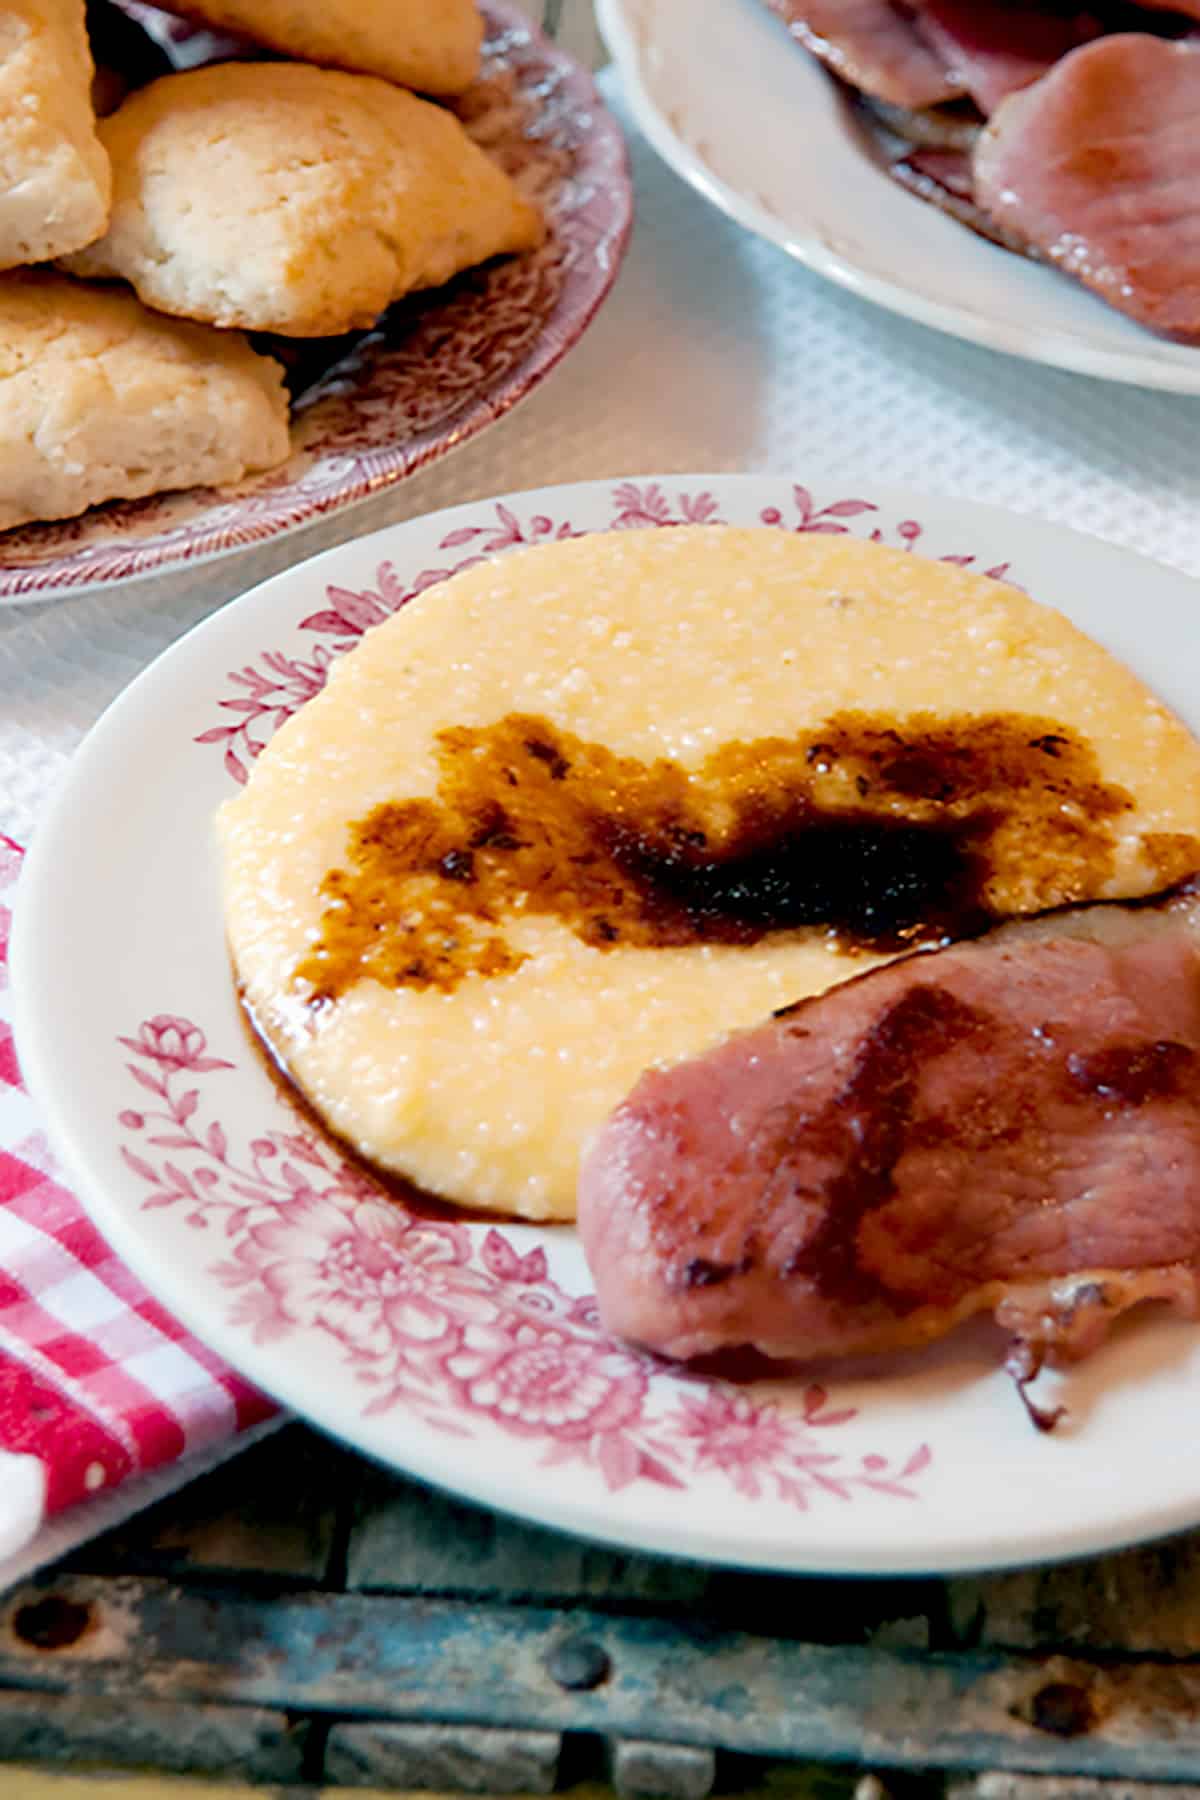 Ham and red eye gravy with cheese grits on a serving plate.